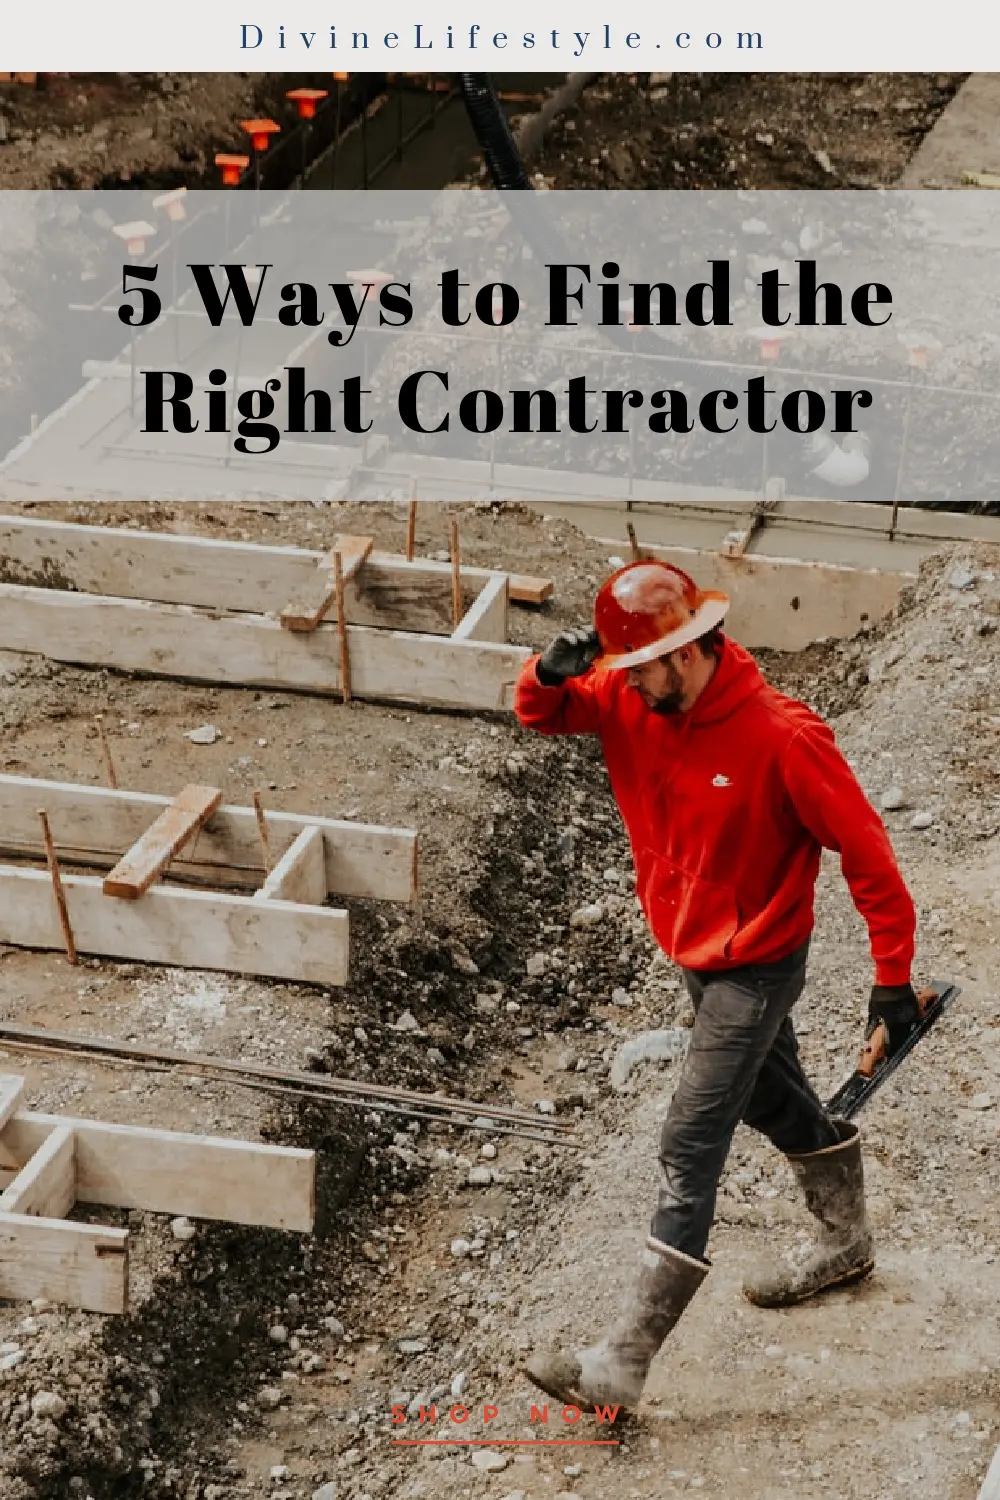 How to Find a Contractor for Small Jobs